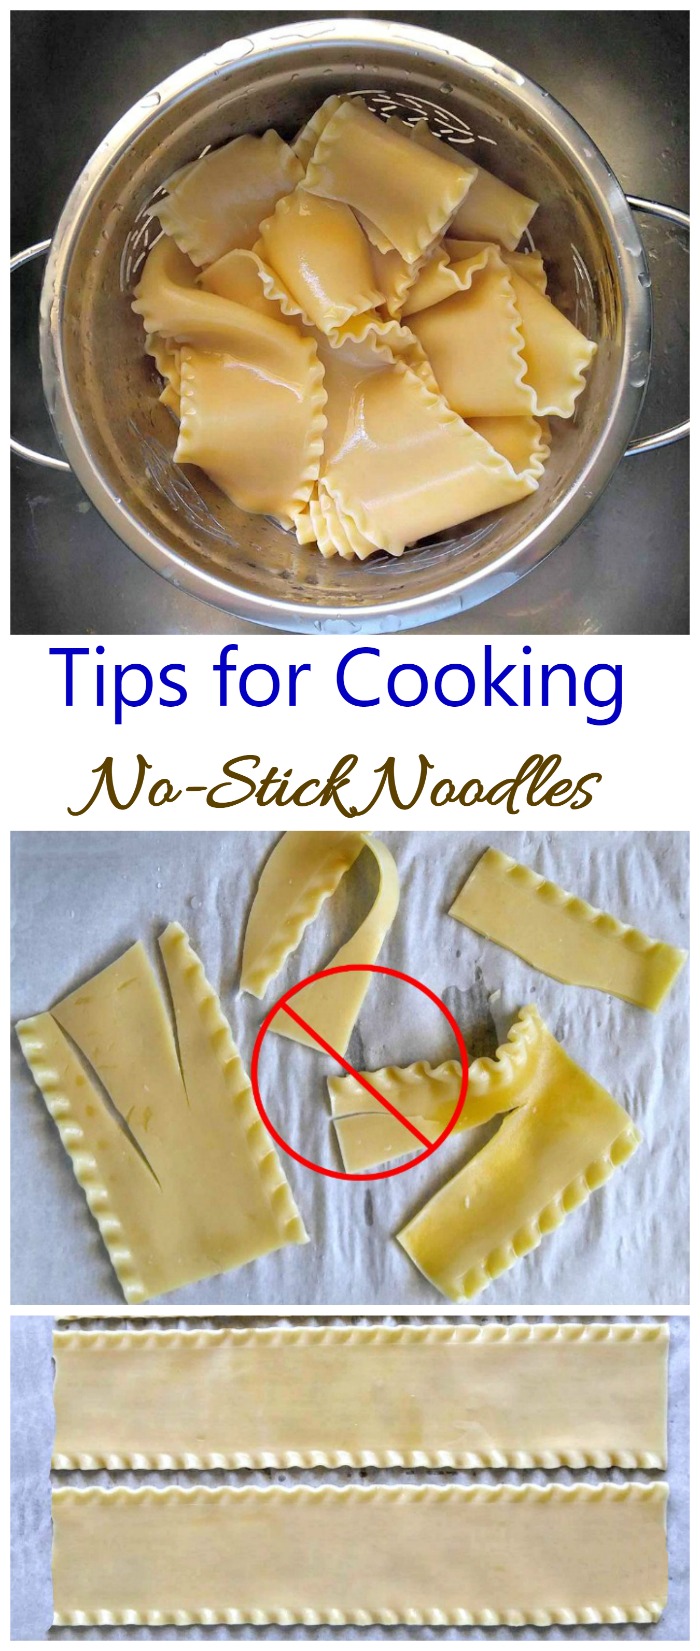 Lasagna noodles can be tricky to cook. See my tips for perfect no stick noodles every time.